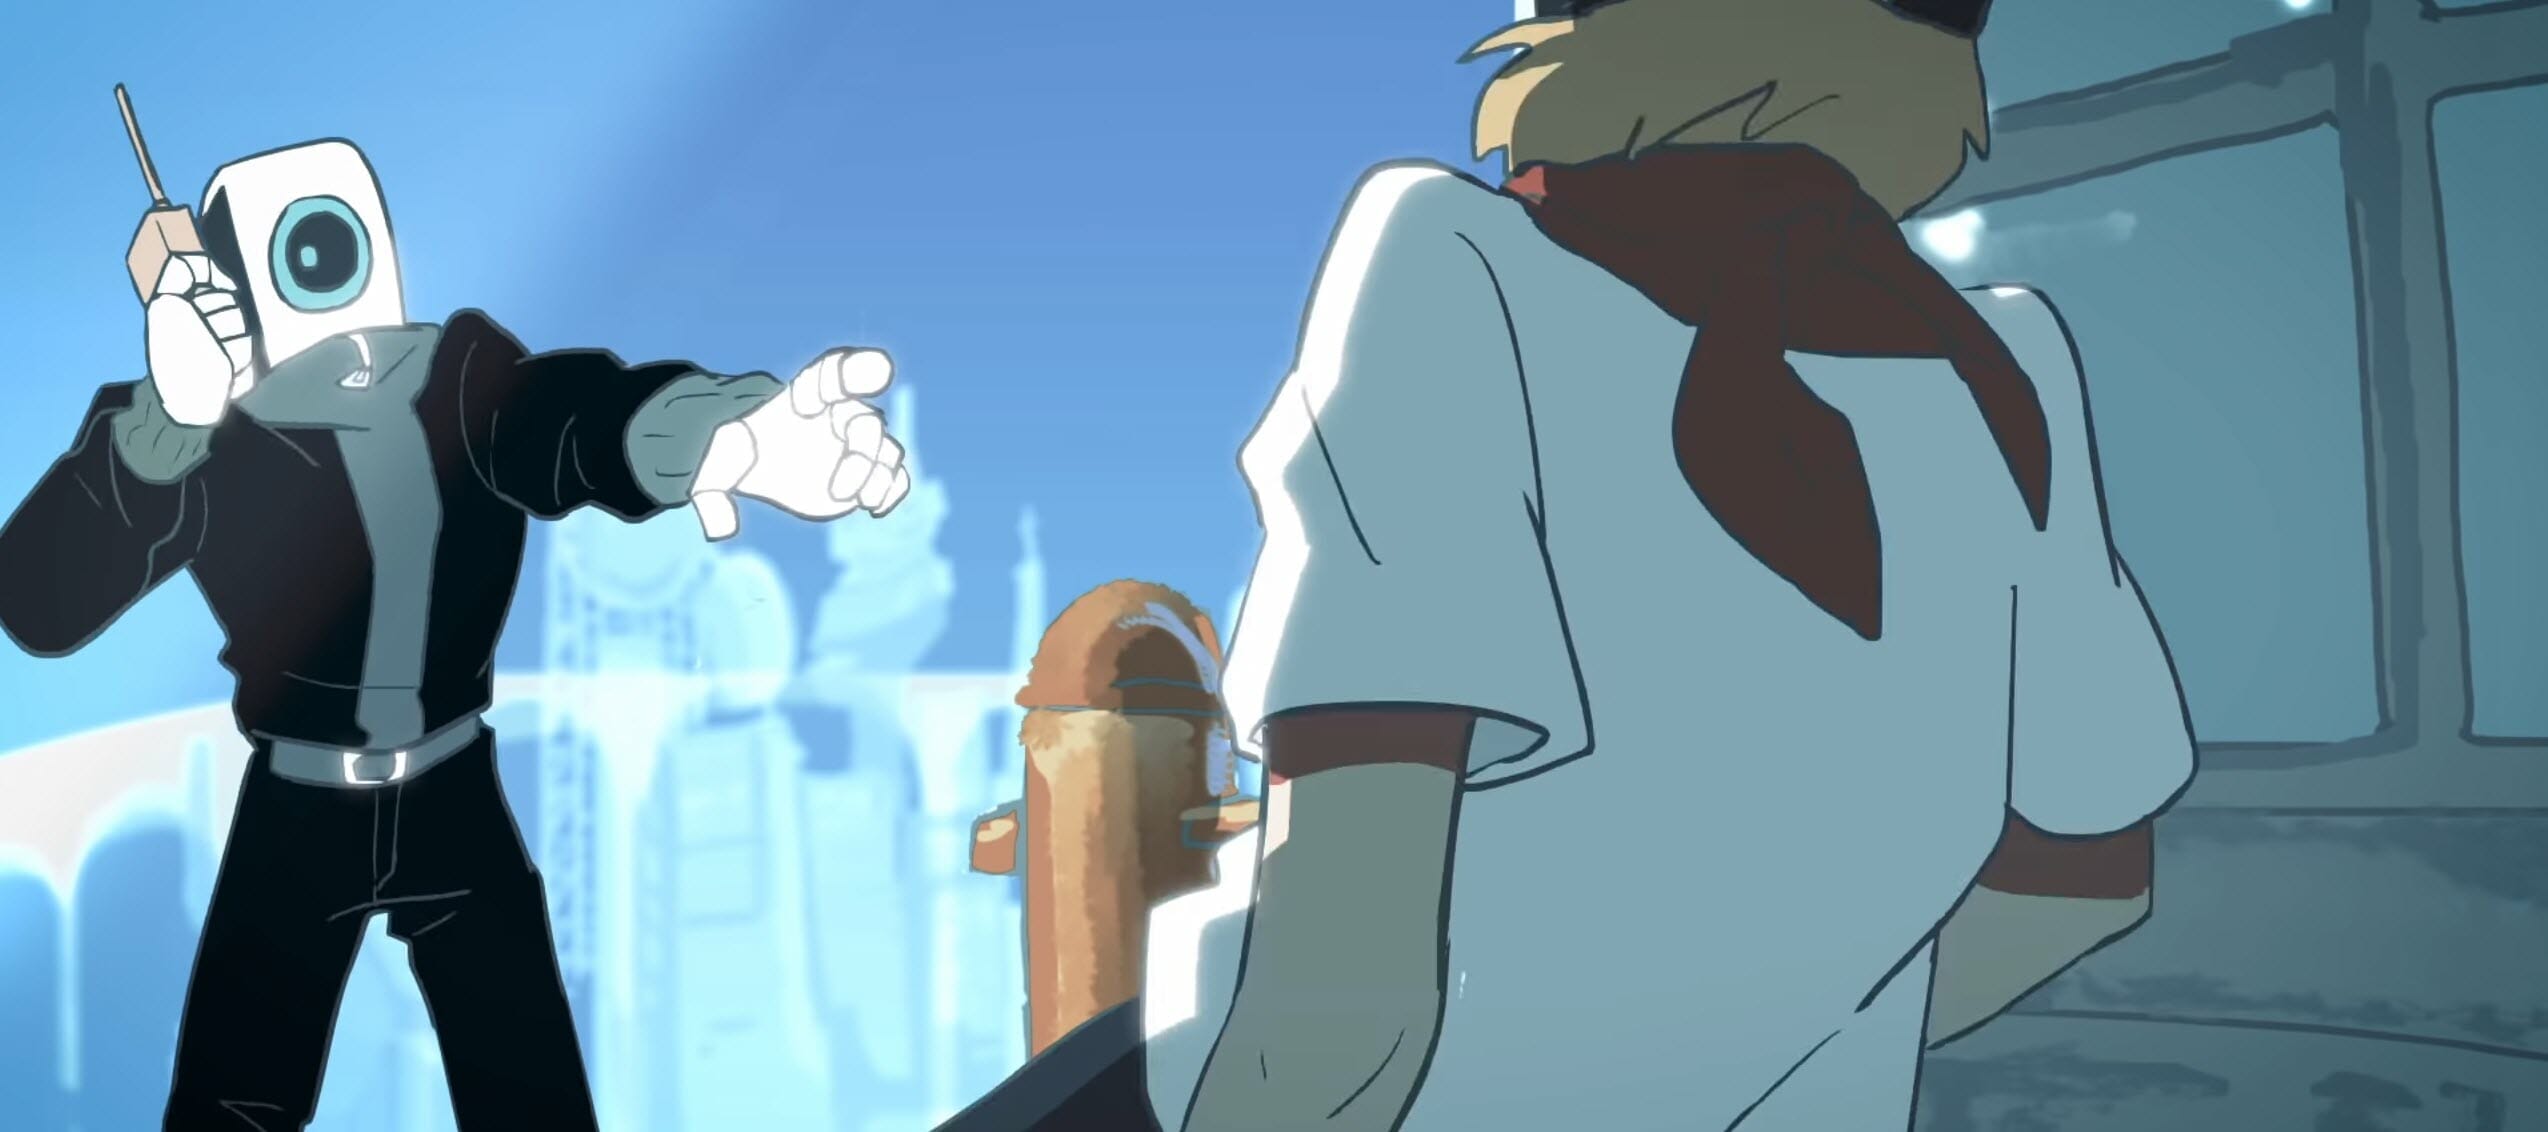 Musician: Porter Robinson returns with a new anime music video